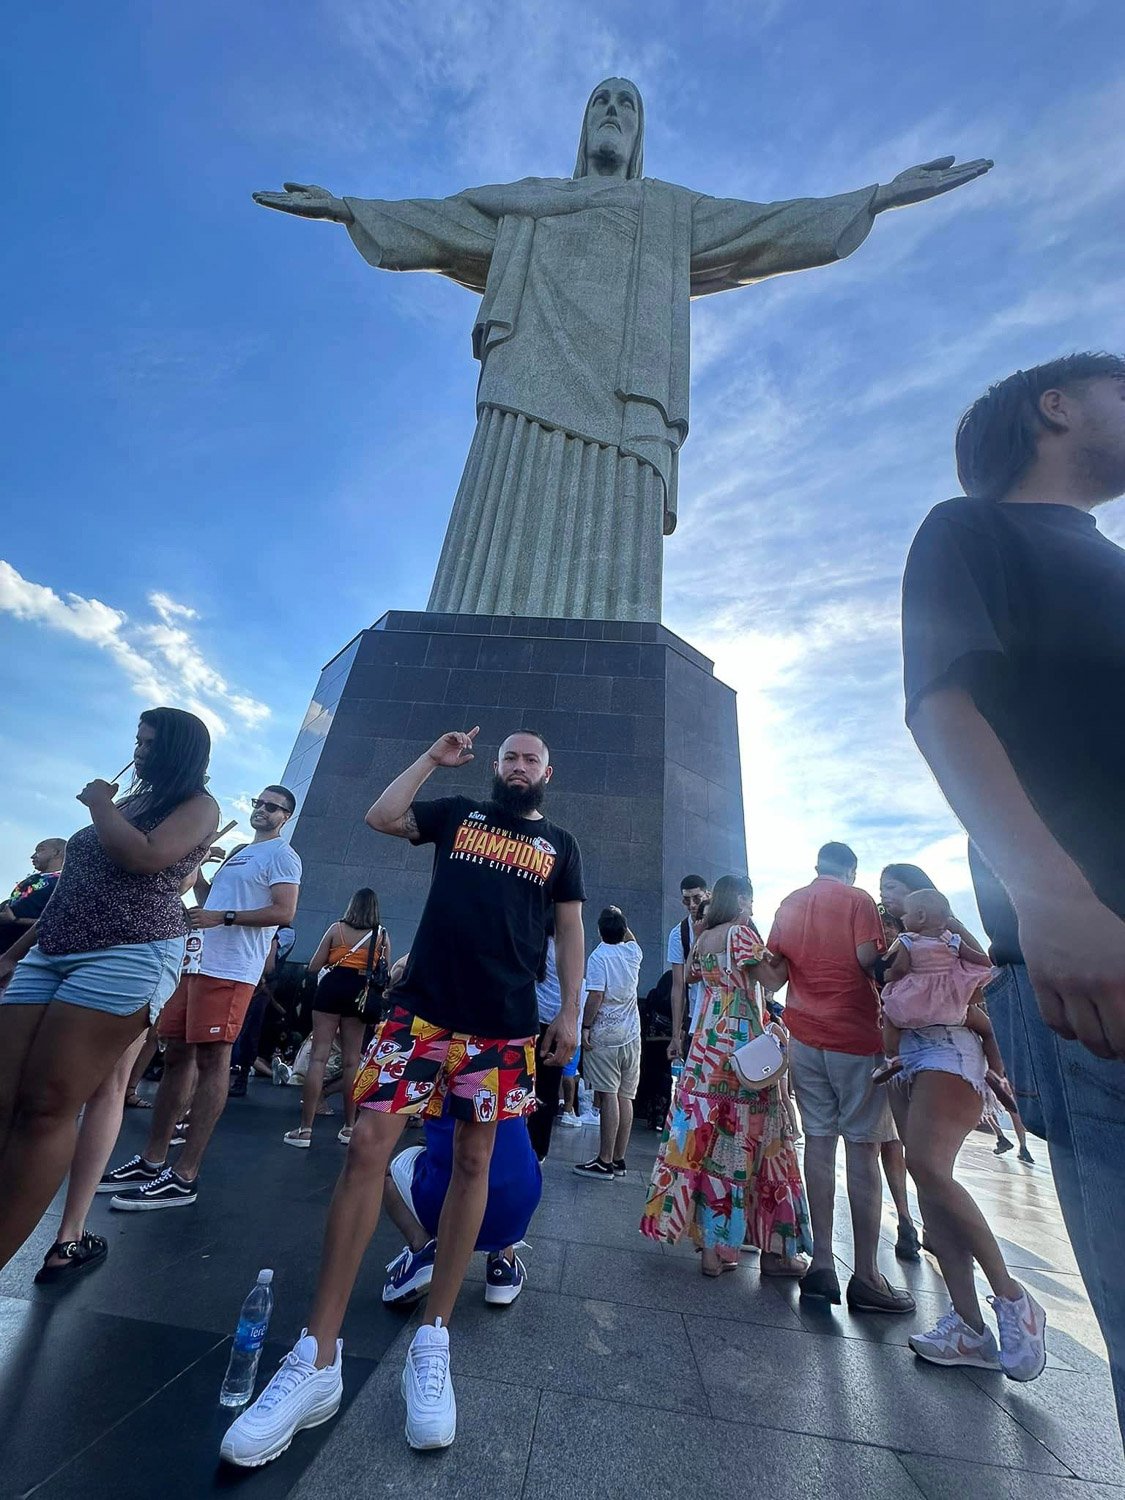 A man posing in a crowd in front of the Christ the Redeemer statue